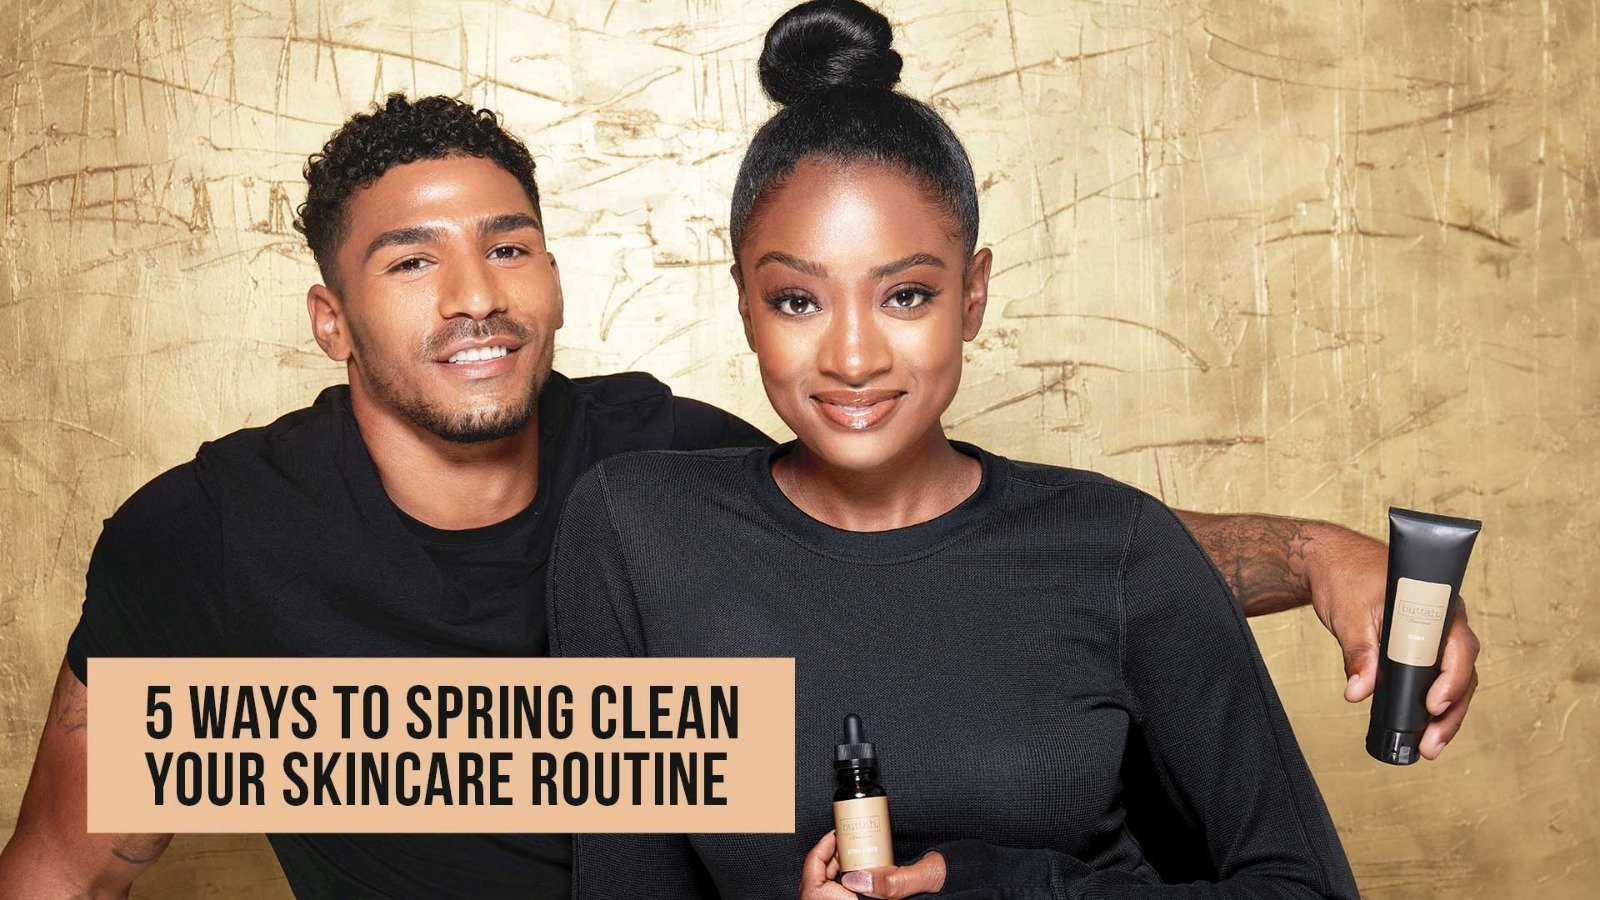 5 Ways to Spring Clean your Skincare Routine | Buttah Skin by Dorion Renaud |  Black Owned Skincare